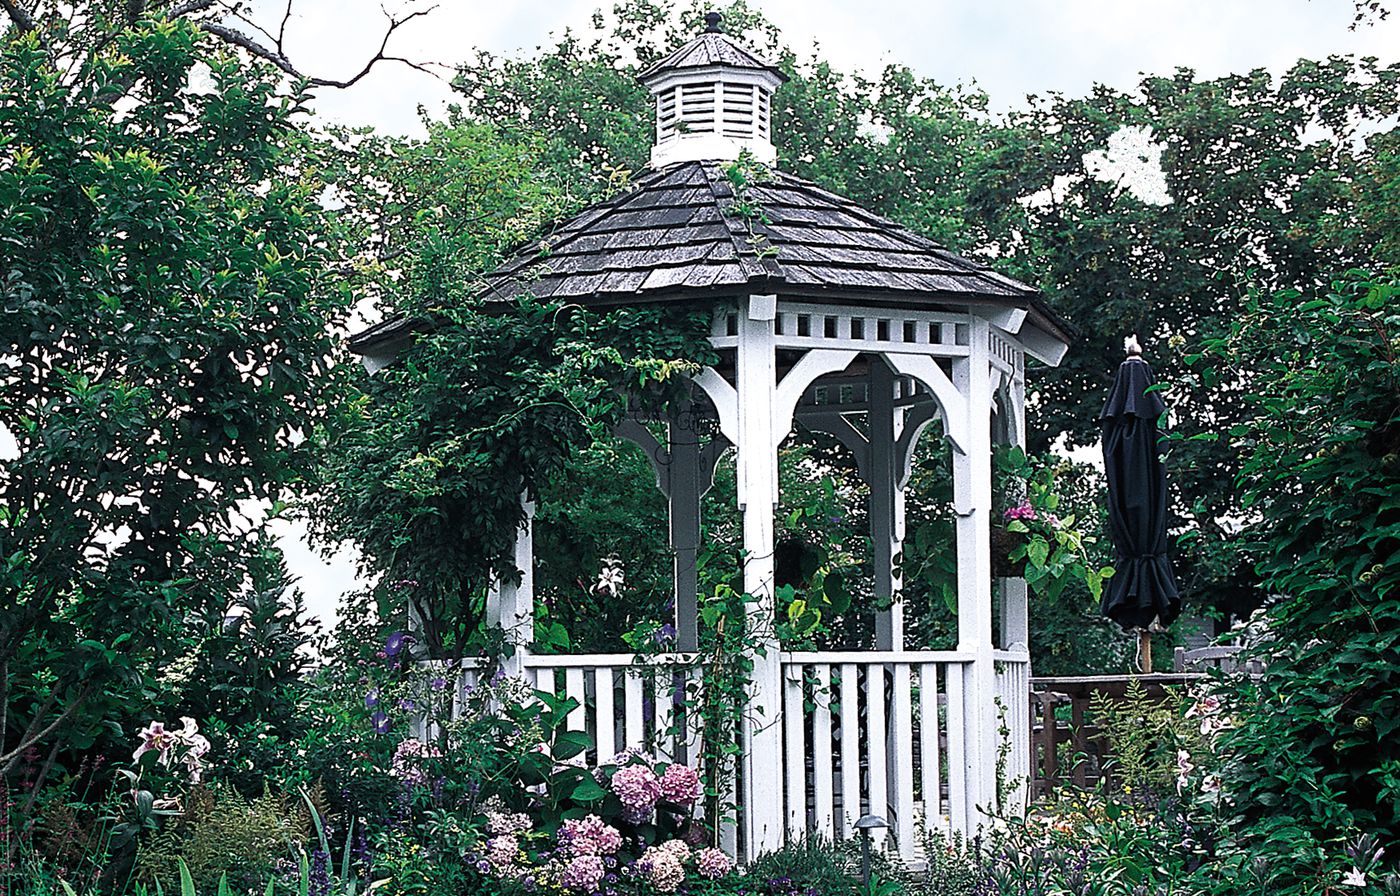 How To Build 12' Octagon Screen Gazebo Project Material List Include #10112 